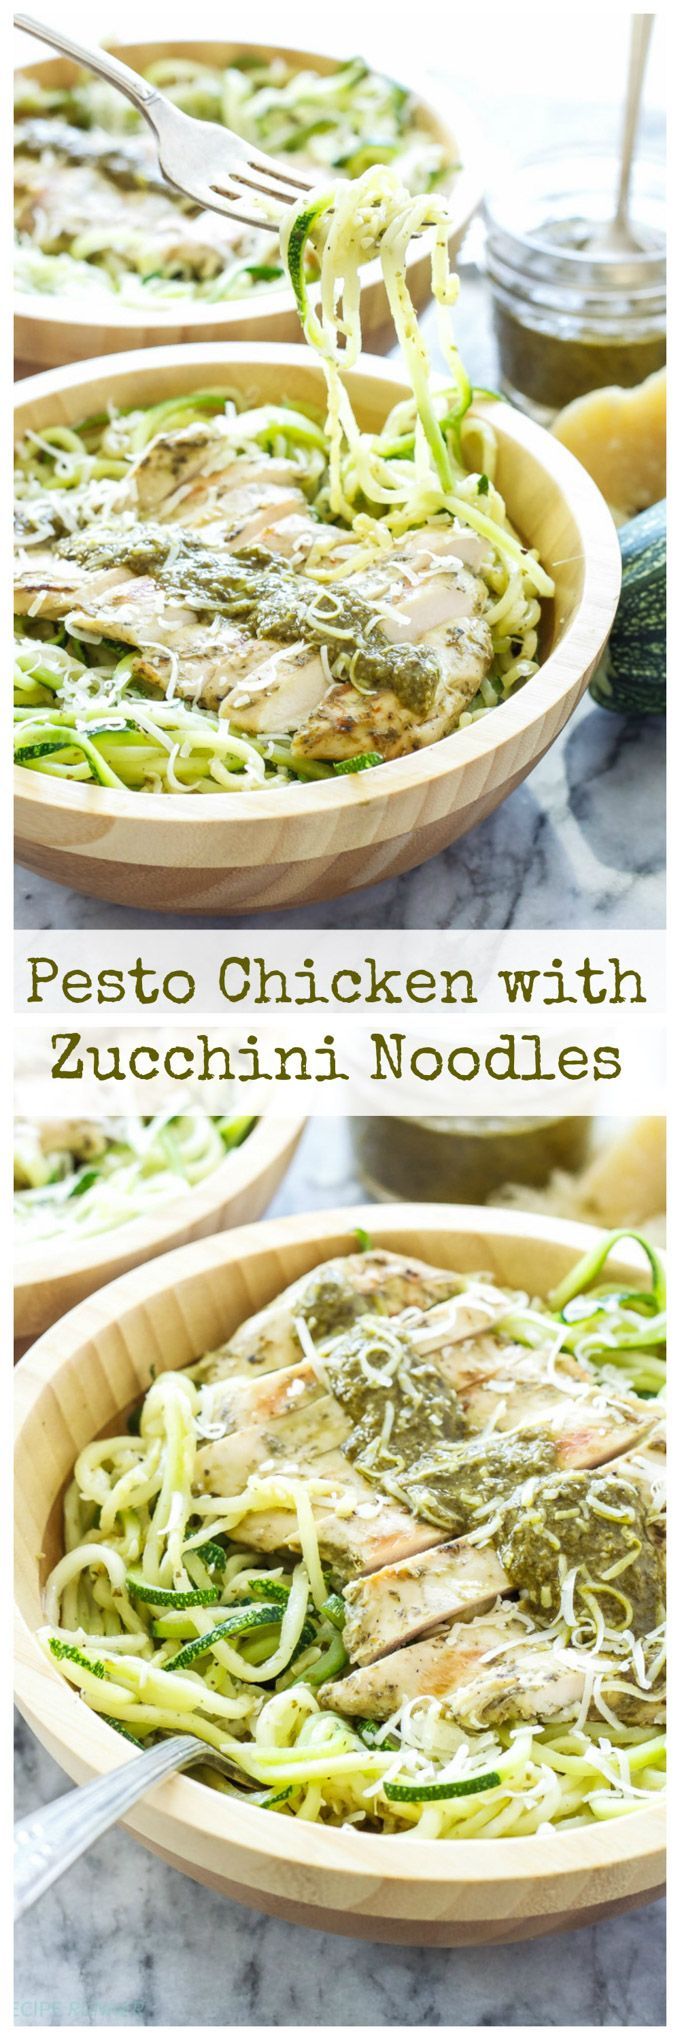 Pesto Chicken with Zucchini Noodles | Pest chicken on top of zucchini noodles is a healthy and delicious alternative to regular